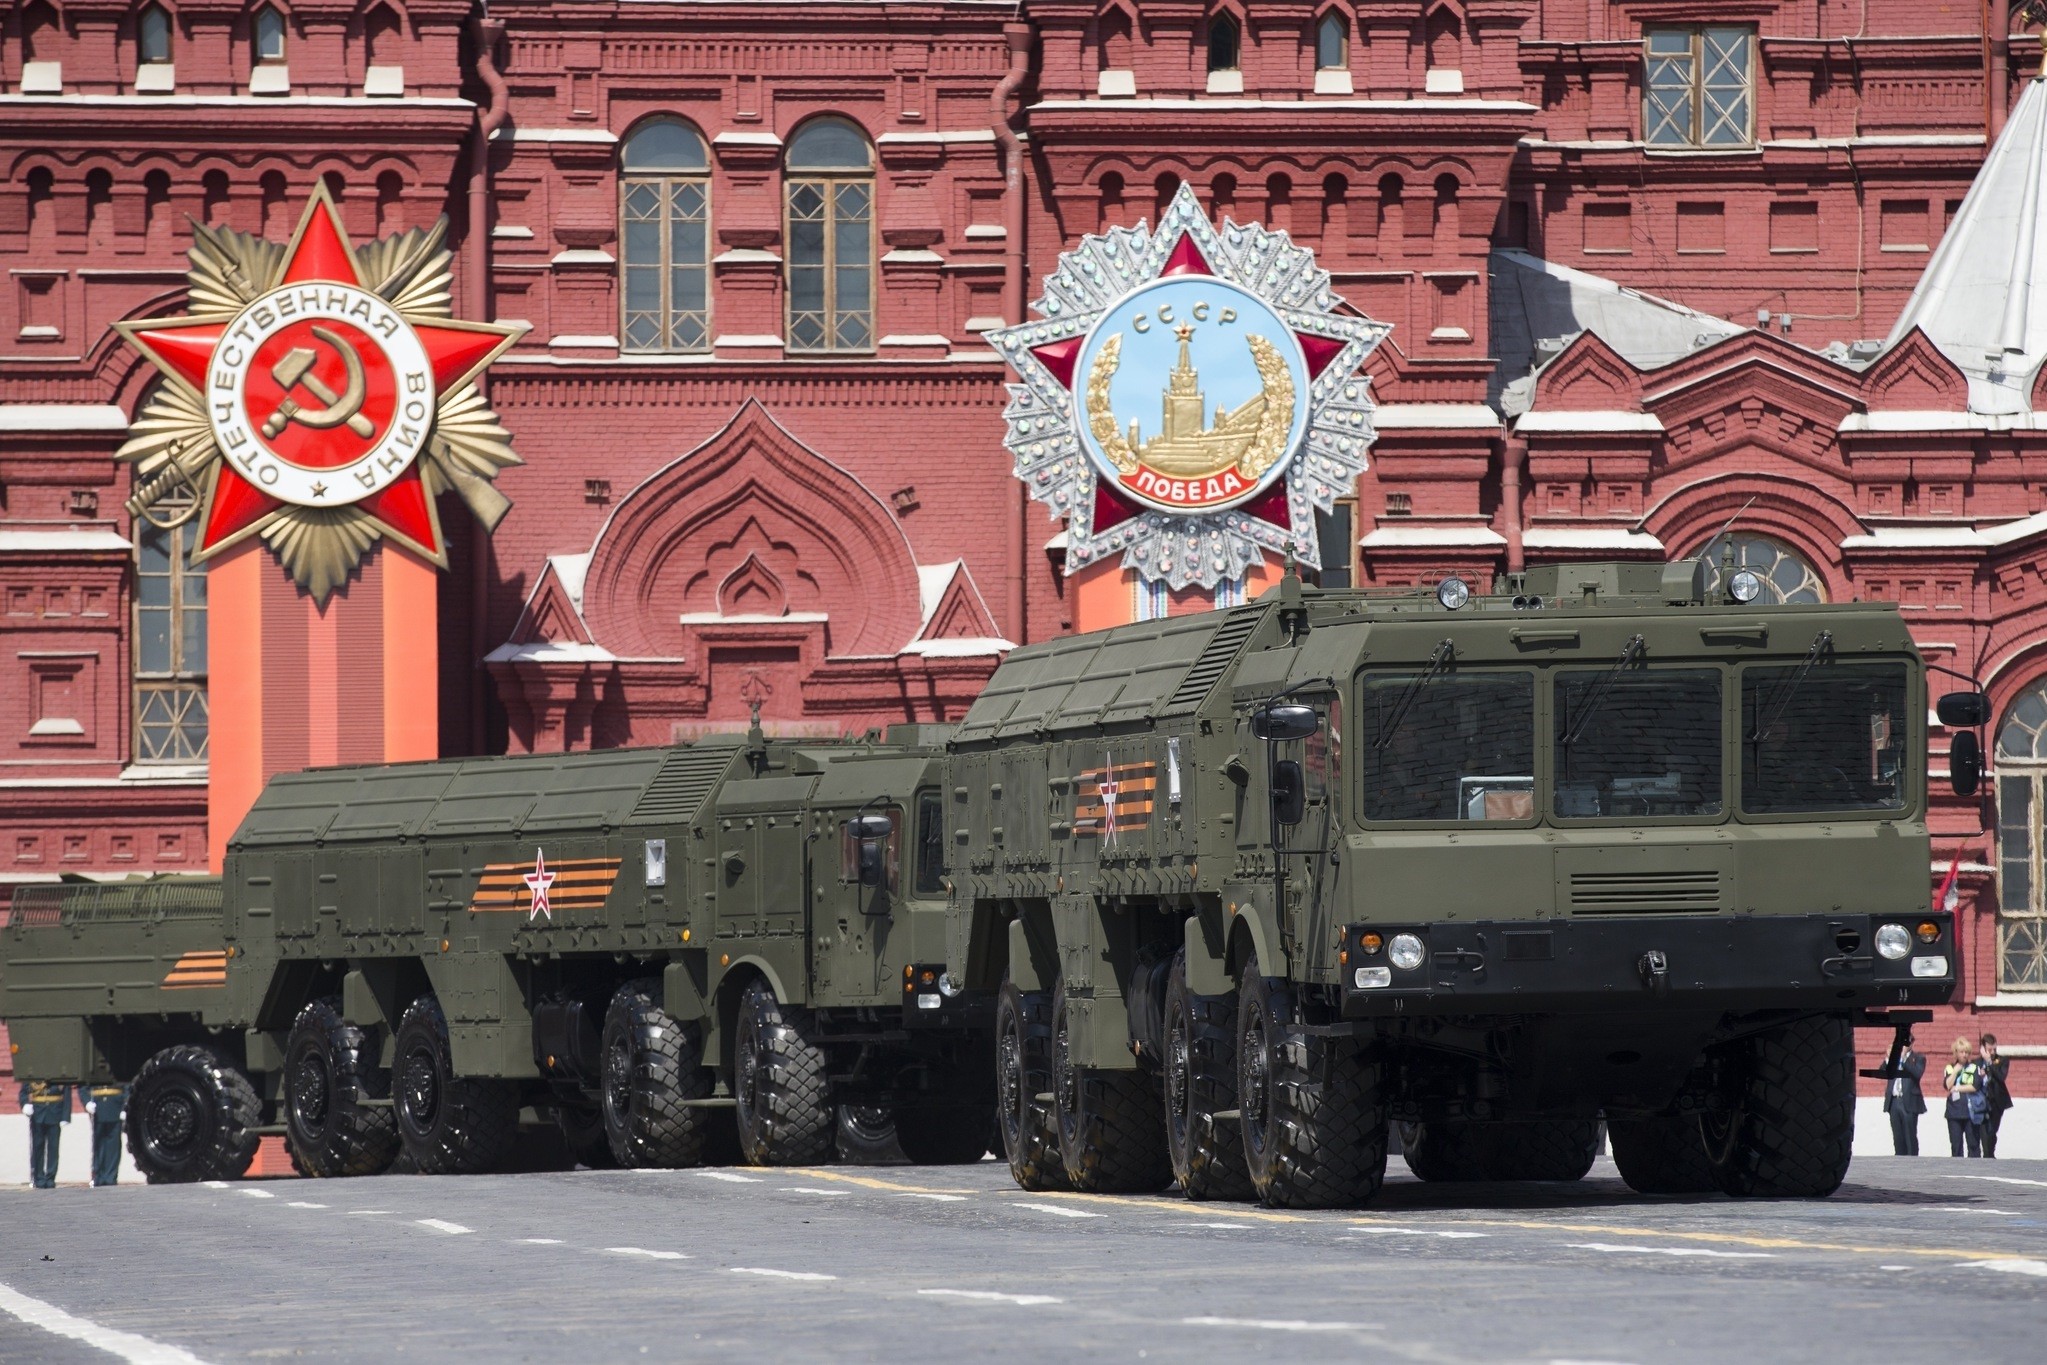  Iskander missile launchers are driven during the Victory Parade marking the 70th anniversary of the defeat of the Nazis in World War II, in Red Square in Moscow. (AP Photo)